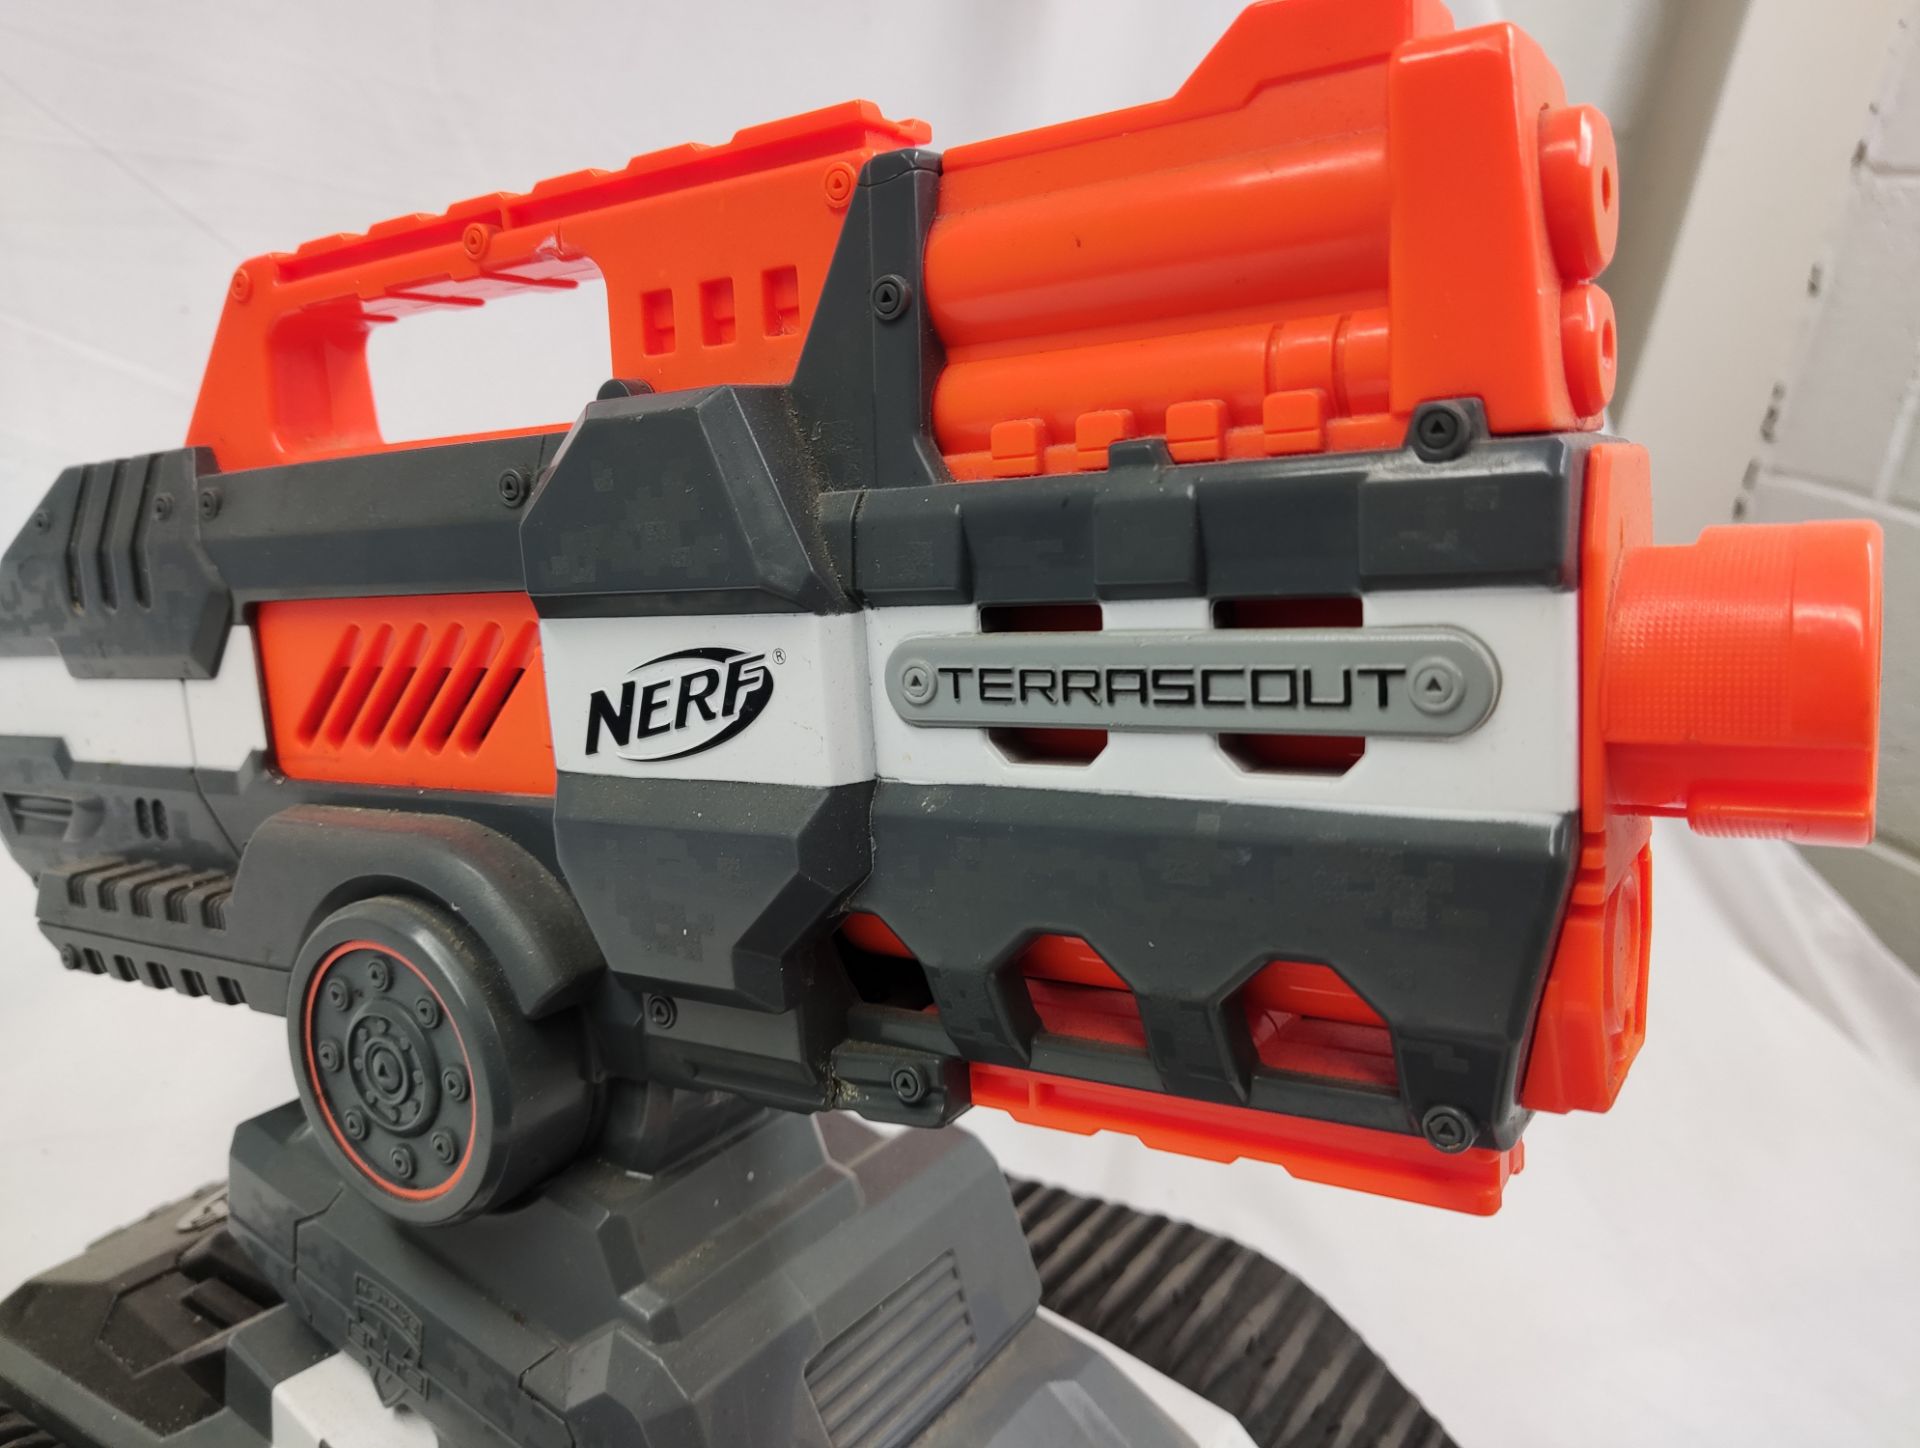 1 x Nerf Terrascout Remote Control Nerf Tank With Video - Used - CL444 - NO VAT ON THE HAMMER - - Image 9 of 14